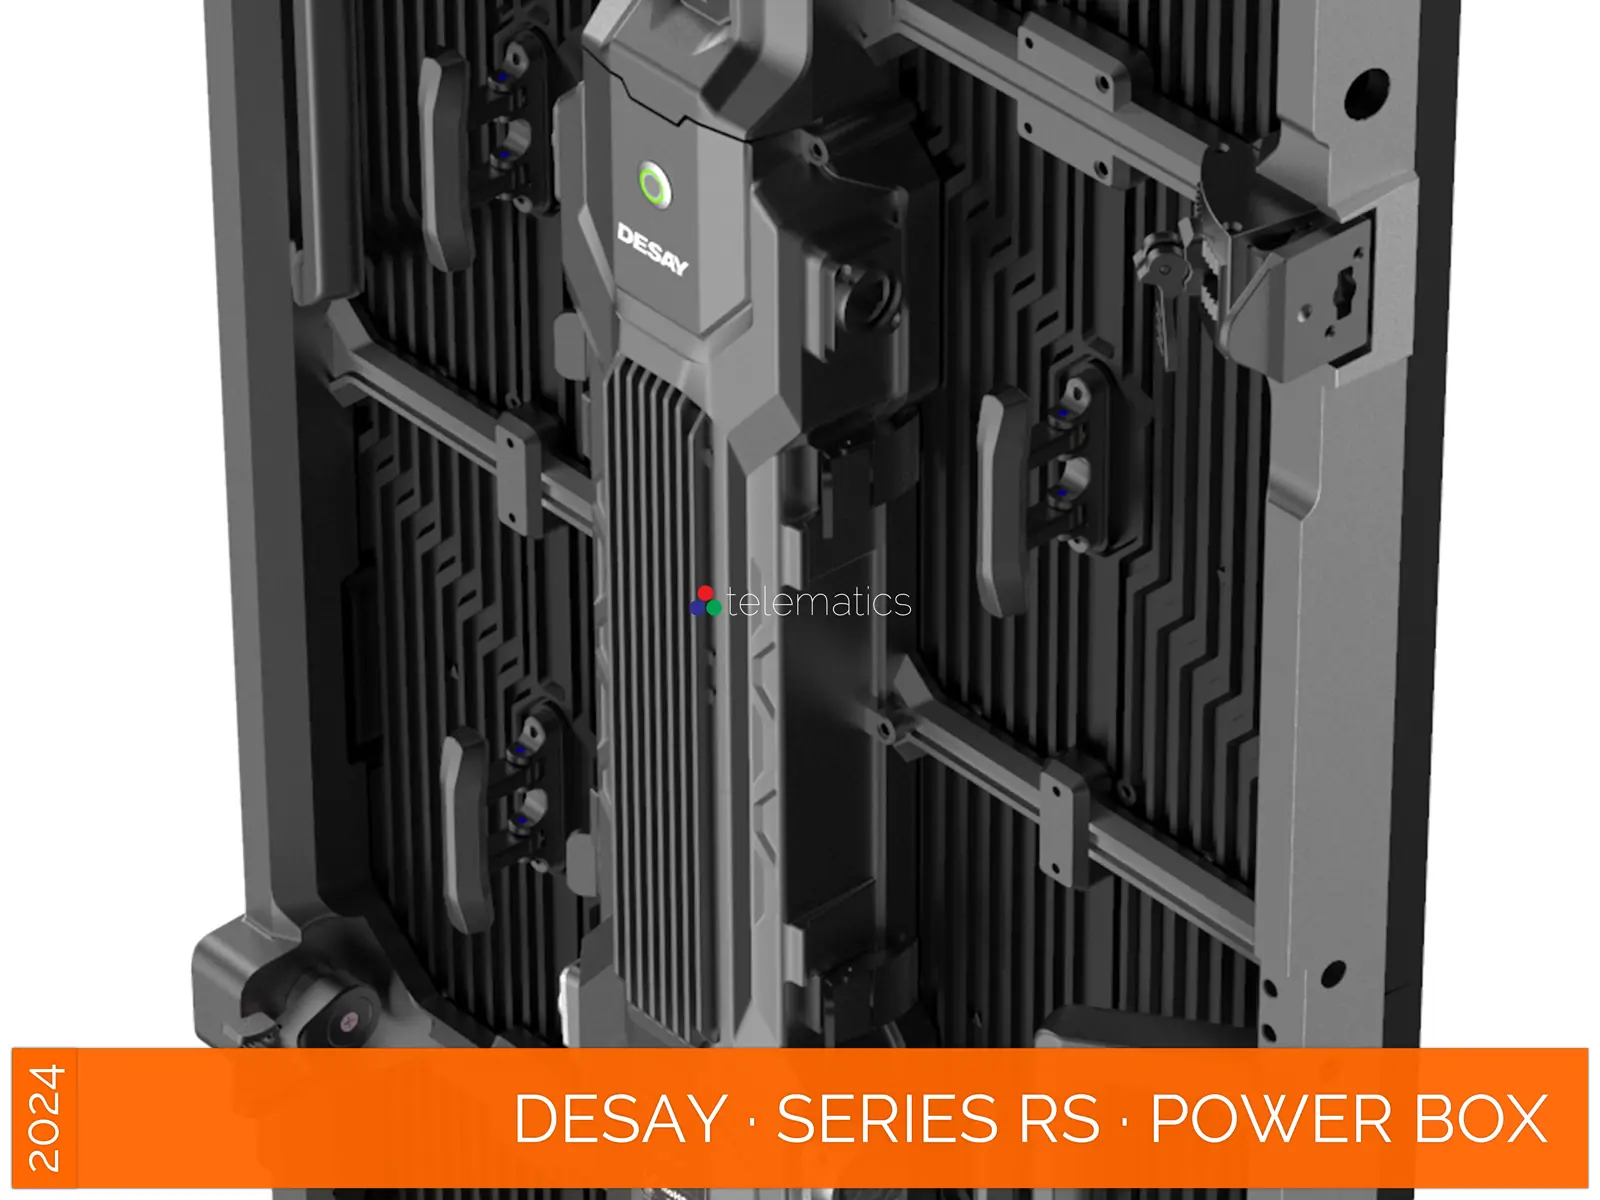 Desay · Series RS · Direct View LED Display Panel · Full Pixel Range · Rental Or Stage · Indoor Rated · Rapid Service And Setup · Power Box With Front And Rear Service Access · NovaStar COEX MX CX · Vision Management Platform · Viplex · review · price · cost · priced from $1,790 per square meter